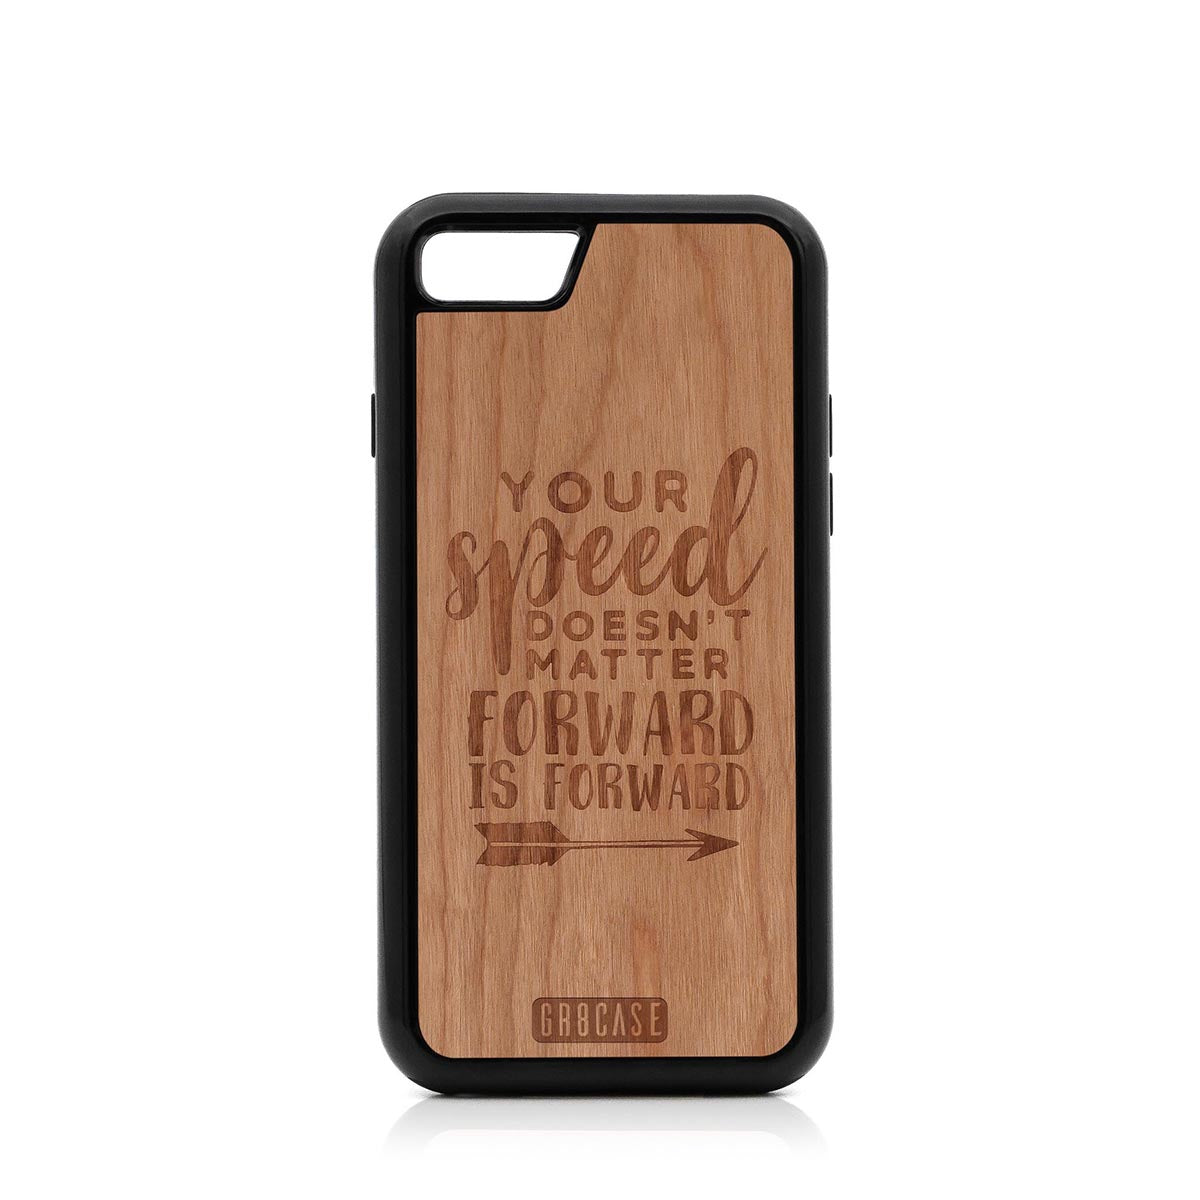 Your Speed Doesn't Matter Forward Is Forward Design Wood Case For iPhone 7/8